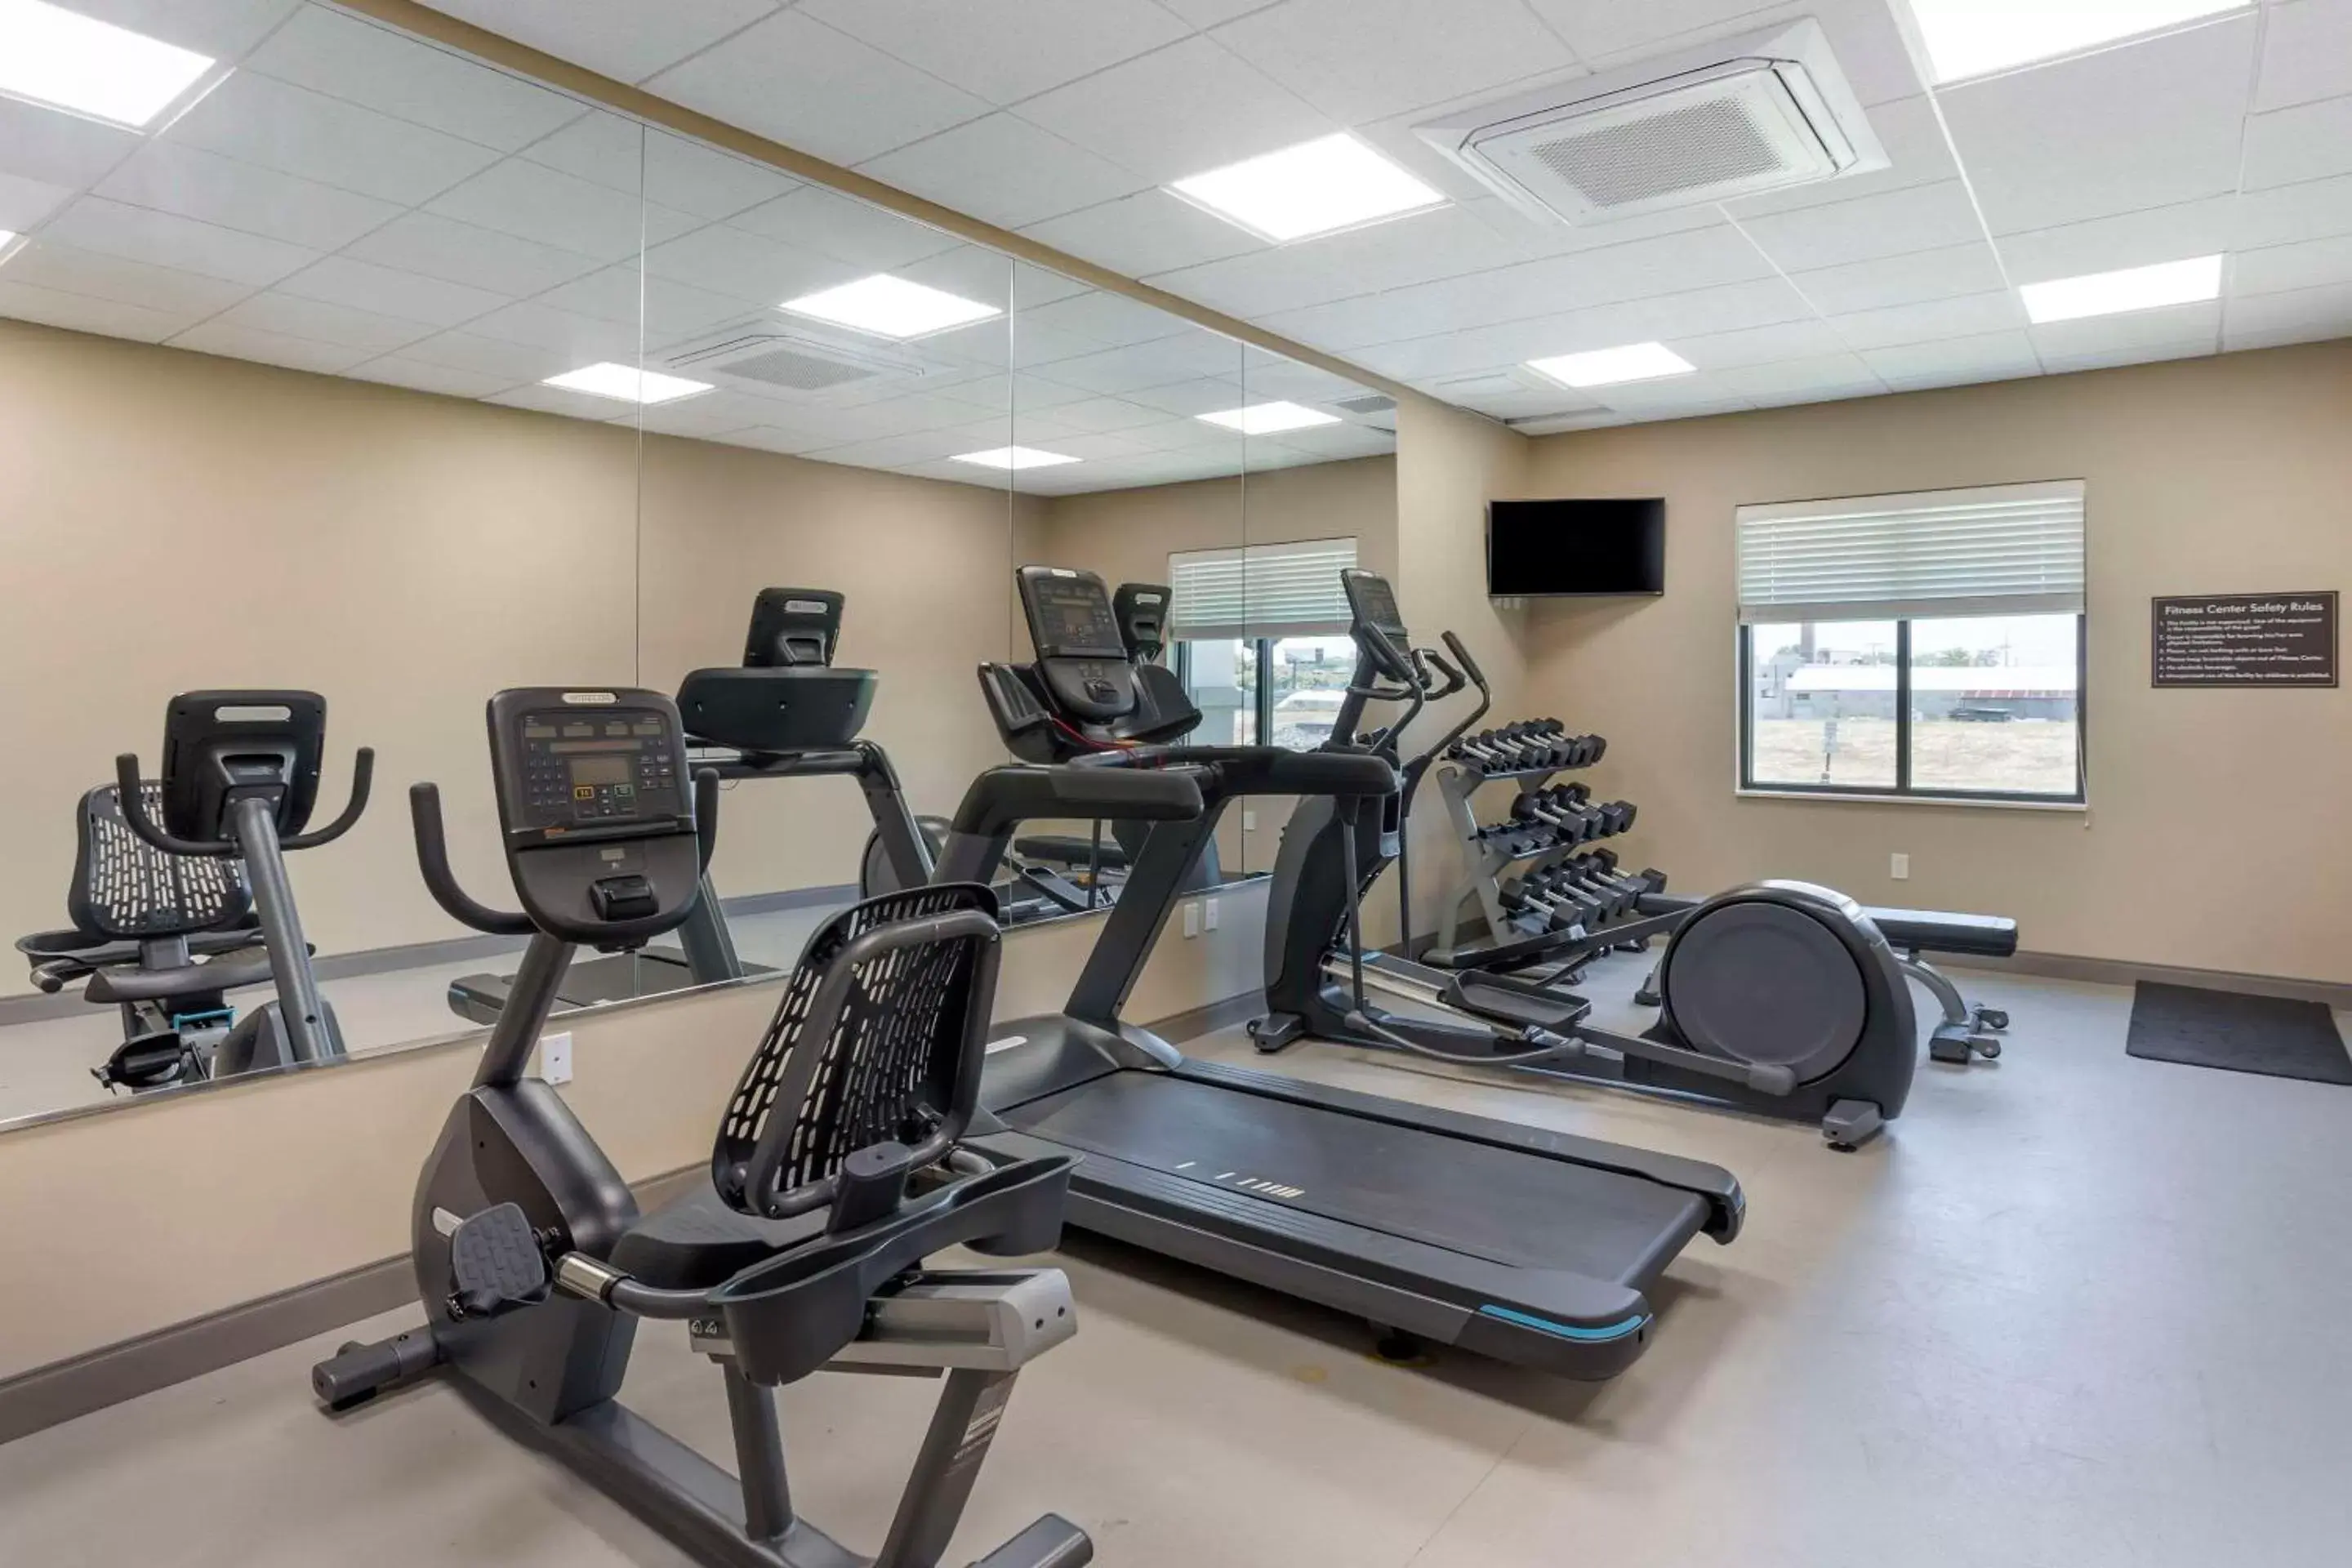 Fitness centre/facilities, Fitness Center/Facilities in MainStay Suites North - Central York